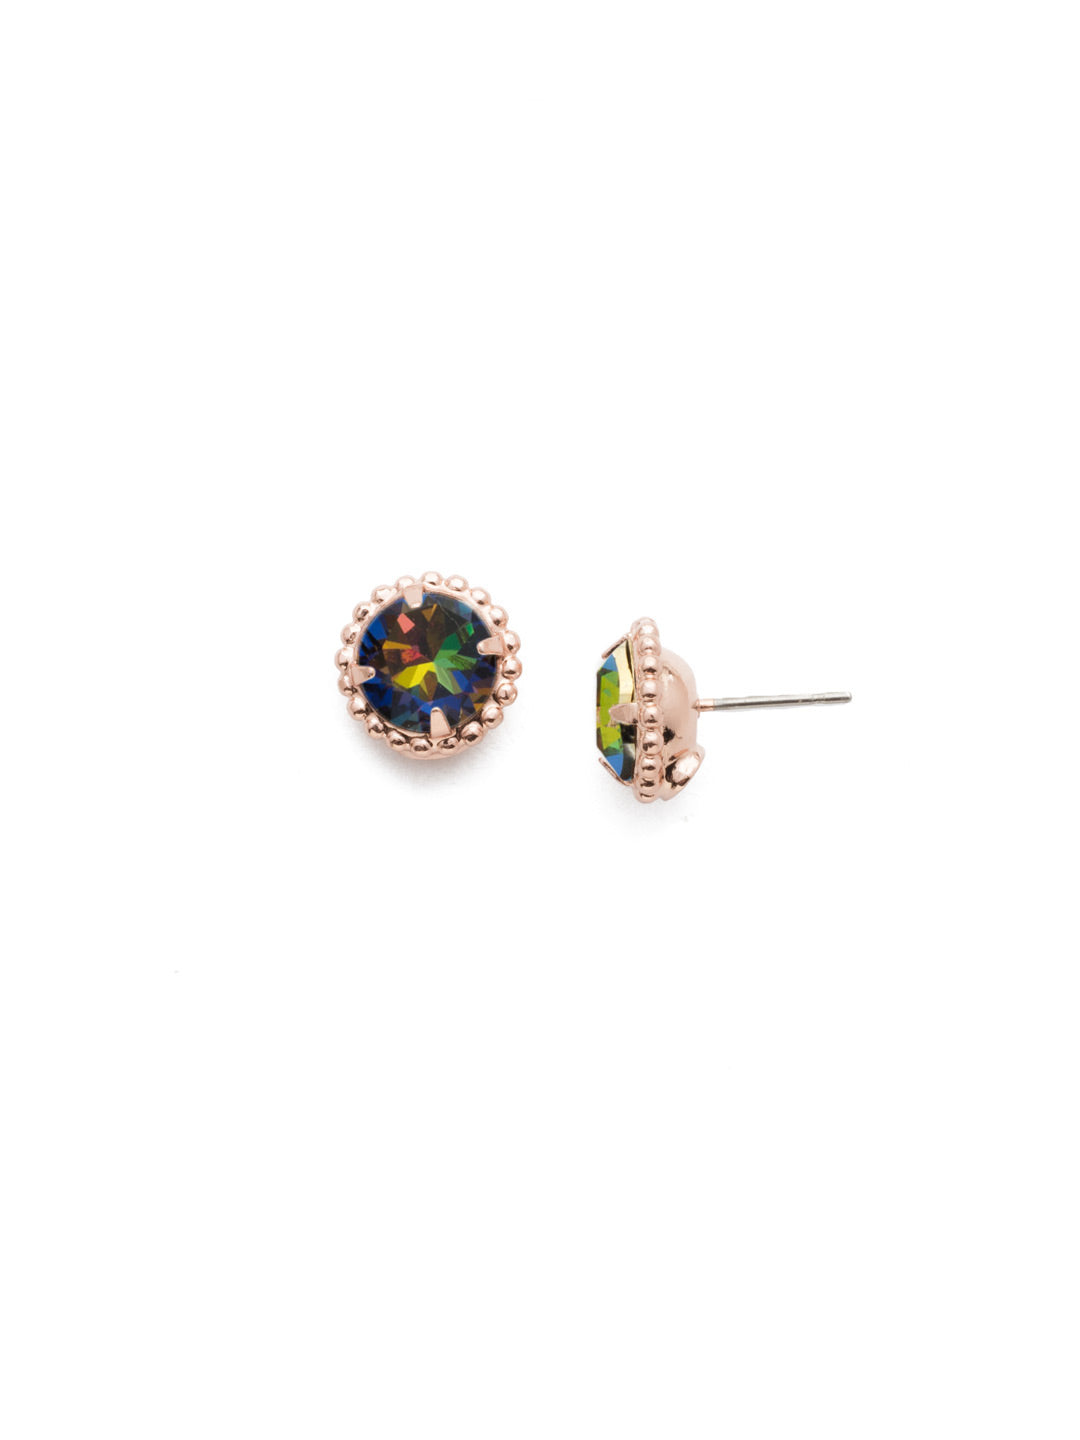 Simplicity Stud Earrings - EBY38RGVO - <p>A timeless classic, the Simplicity Stud Earrings feature round cut crystals in a variety of colors; accented with a halo of metal beaded detail. Need help picking a stud? <a href="https://www.sorrelli.com/blogs/sisterhood/round-stud-earrings-101-a-rundown-of-sizes-styles-and-sparkle">Check out our size guide!</a> From Sorrelli's Volcano collection in our Rose Gold-tone finish.</p>